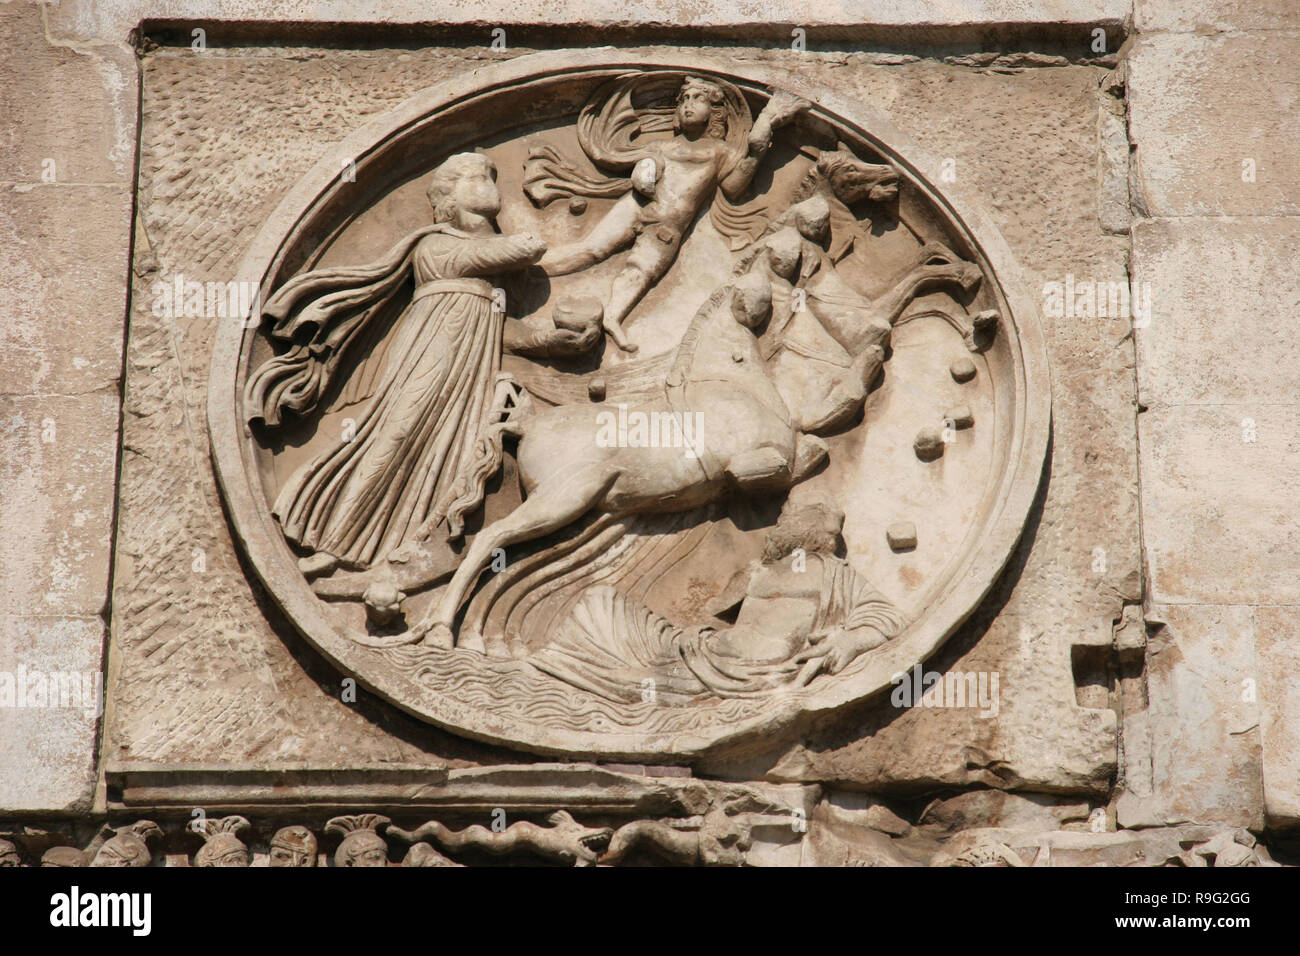 Roman Art. Arch of Constantine. Triumphal arch. It was erected to commemorate  Constantine victory over Maxentius at the Batlle of Milvian Bridge (October 28, 312). Reuse of parts of earlier buildings. Detail of medallion (relief). IV century AD. Rome. Italy. Europe. Stock Photo